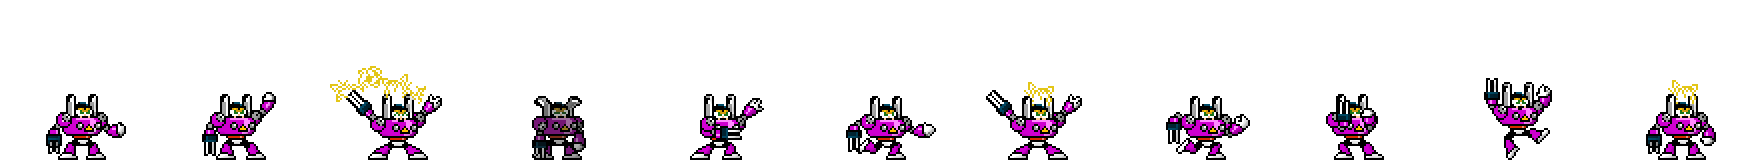 Plug Man | Base Sprite Right<div style="margin-top: 4px; letting-spacing: 1px; font-size: 90%; font-family: Courier New; color: rgb(159, 150, 172);">[robot:right:base]{plug-man}</div>